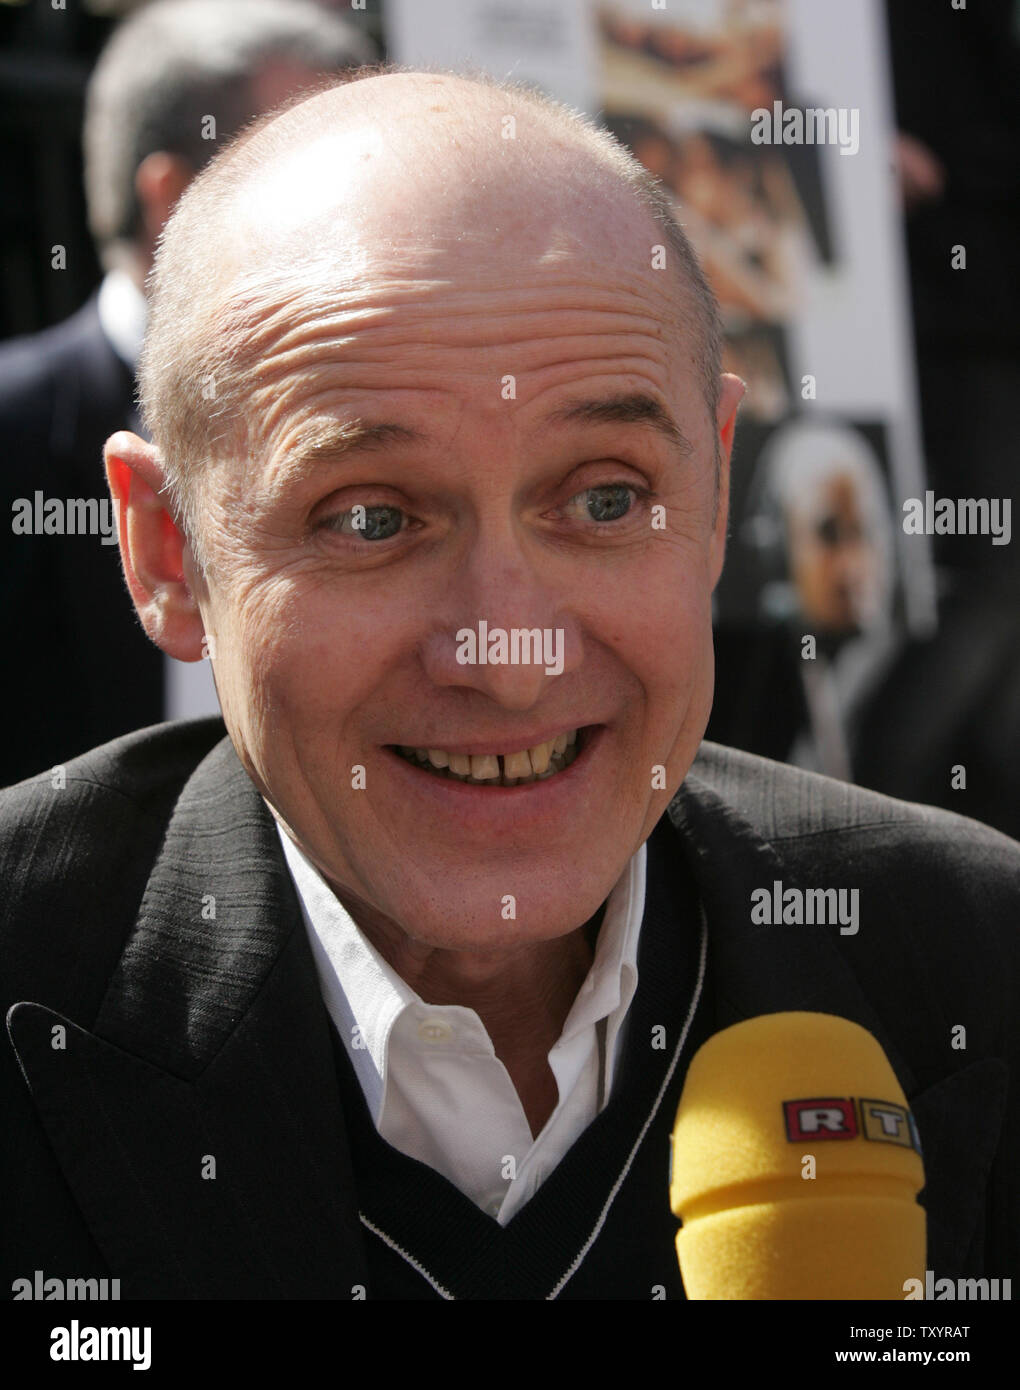 German actor Ulrich Muhe from "The Lives of Others" answers questions from reporters in the arrival area for the 79th Academy Awards in Los Angeles on February 23, 2007.  (UPI Photo/Terry Schmitt) Stock Photo